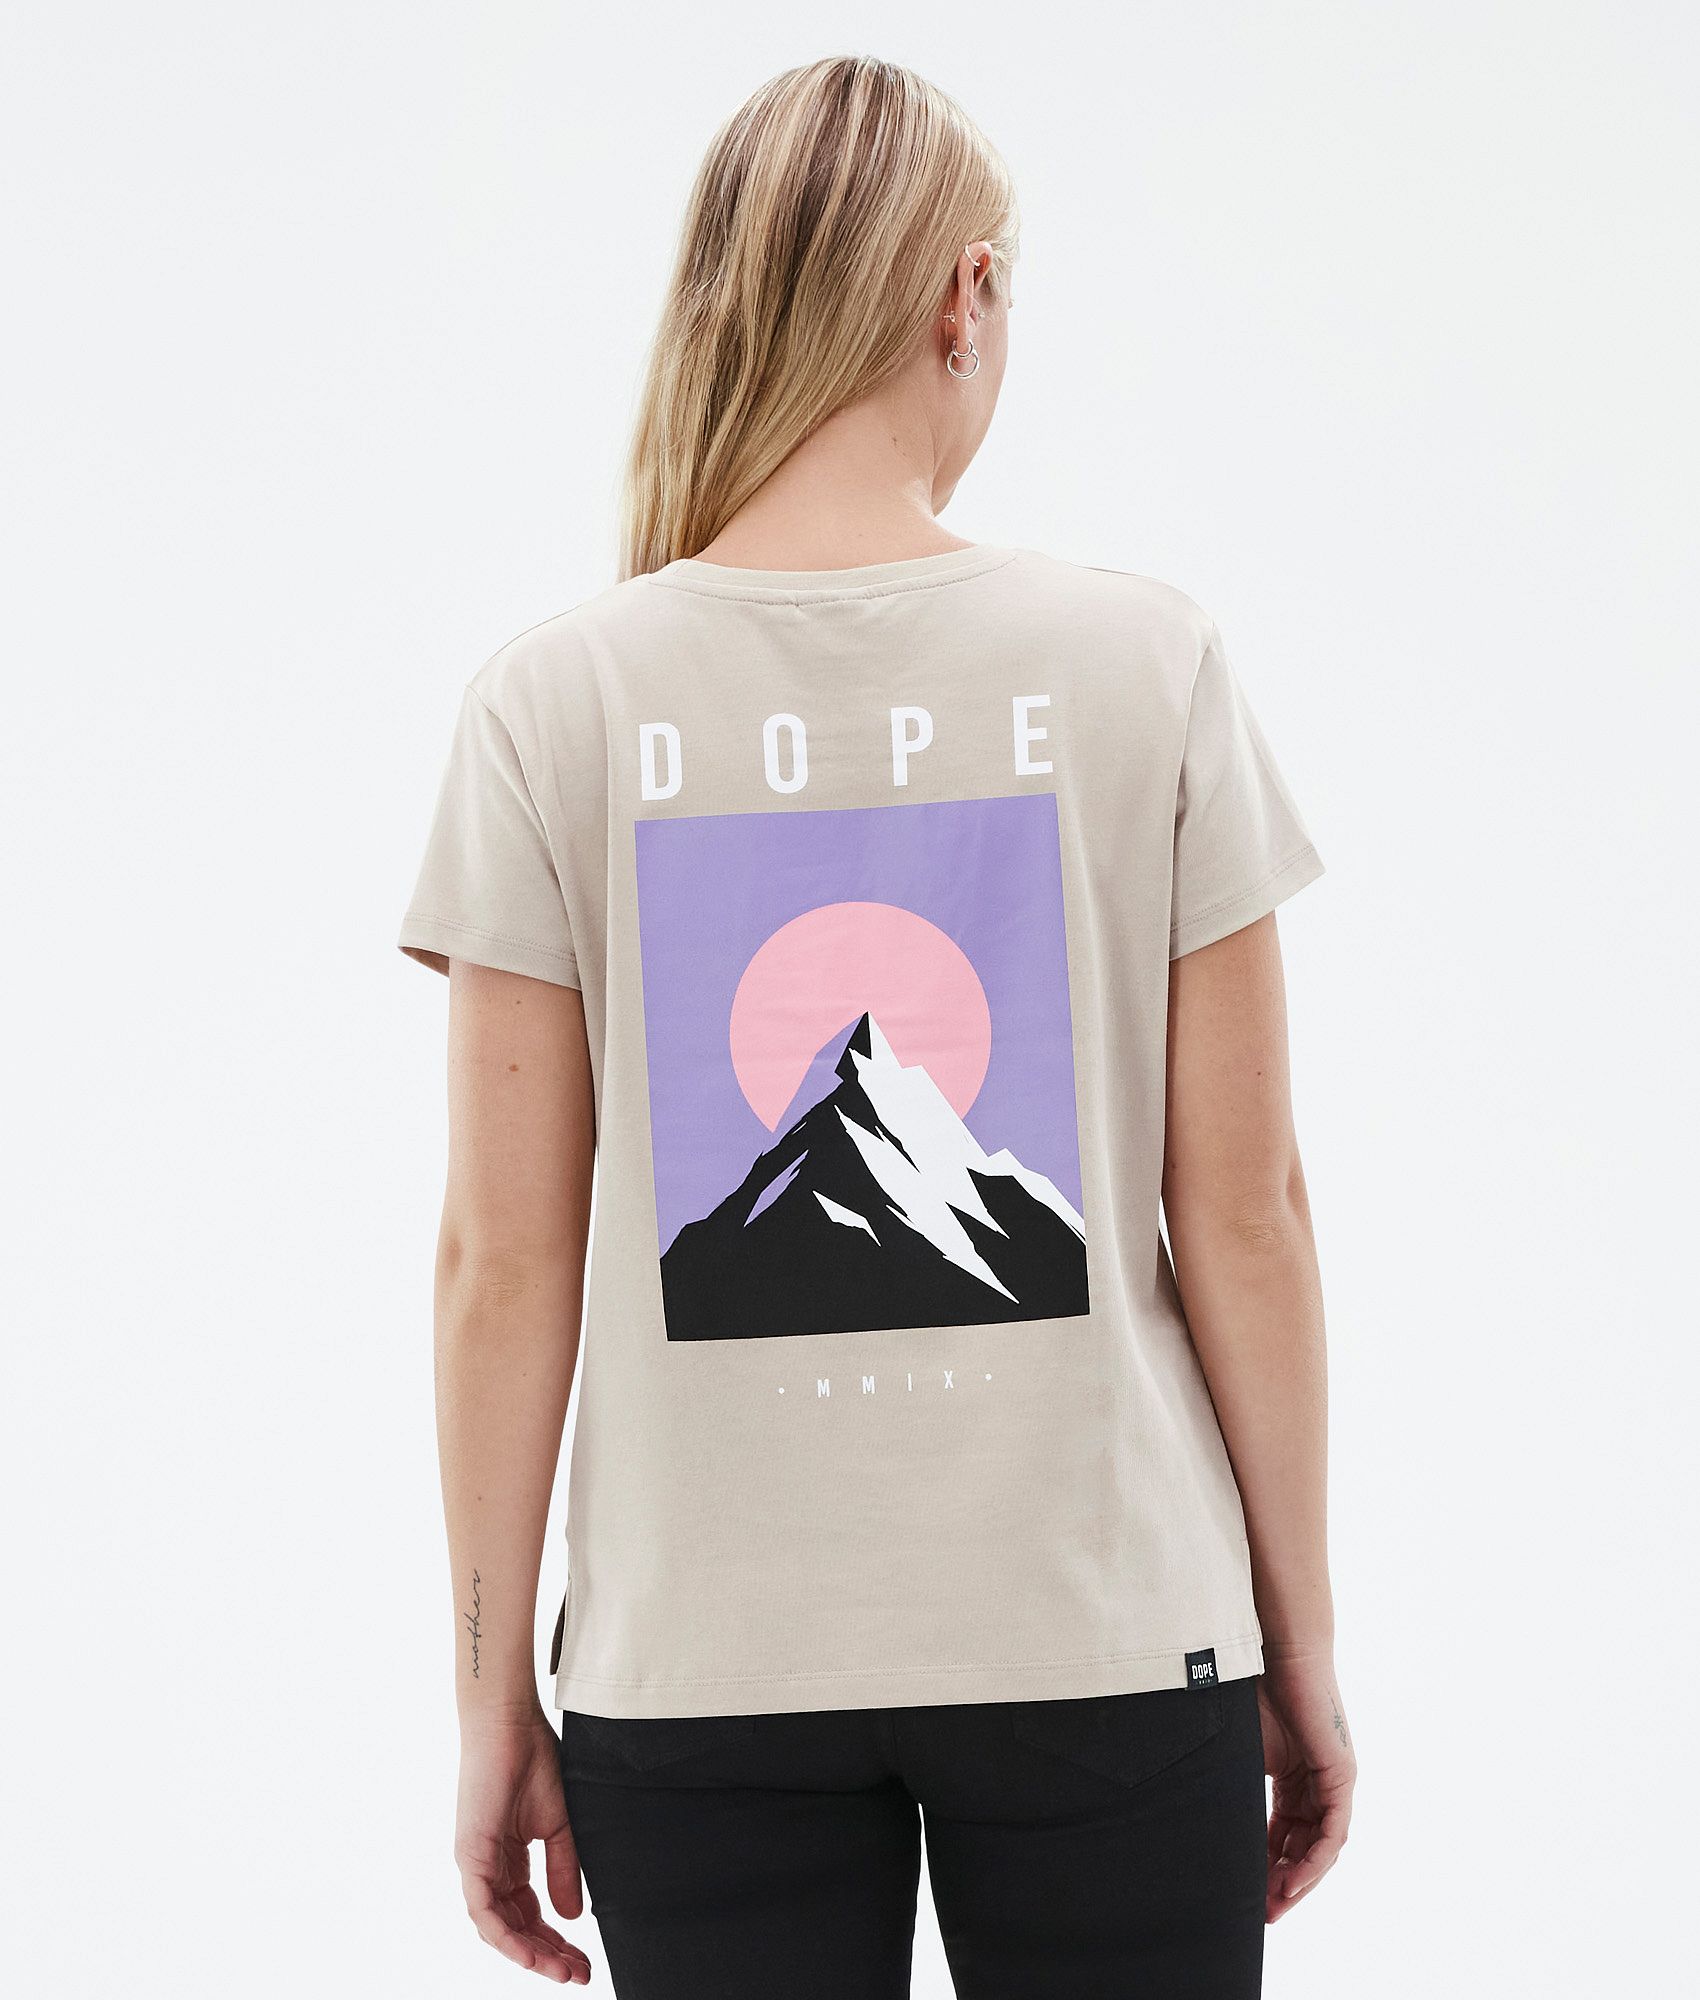 Women's Streetwear T-shirts | Free Delivery | Dopesnow.com